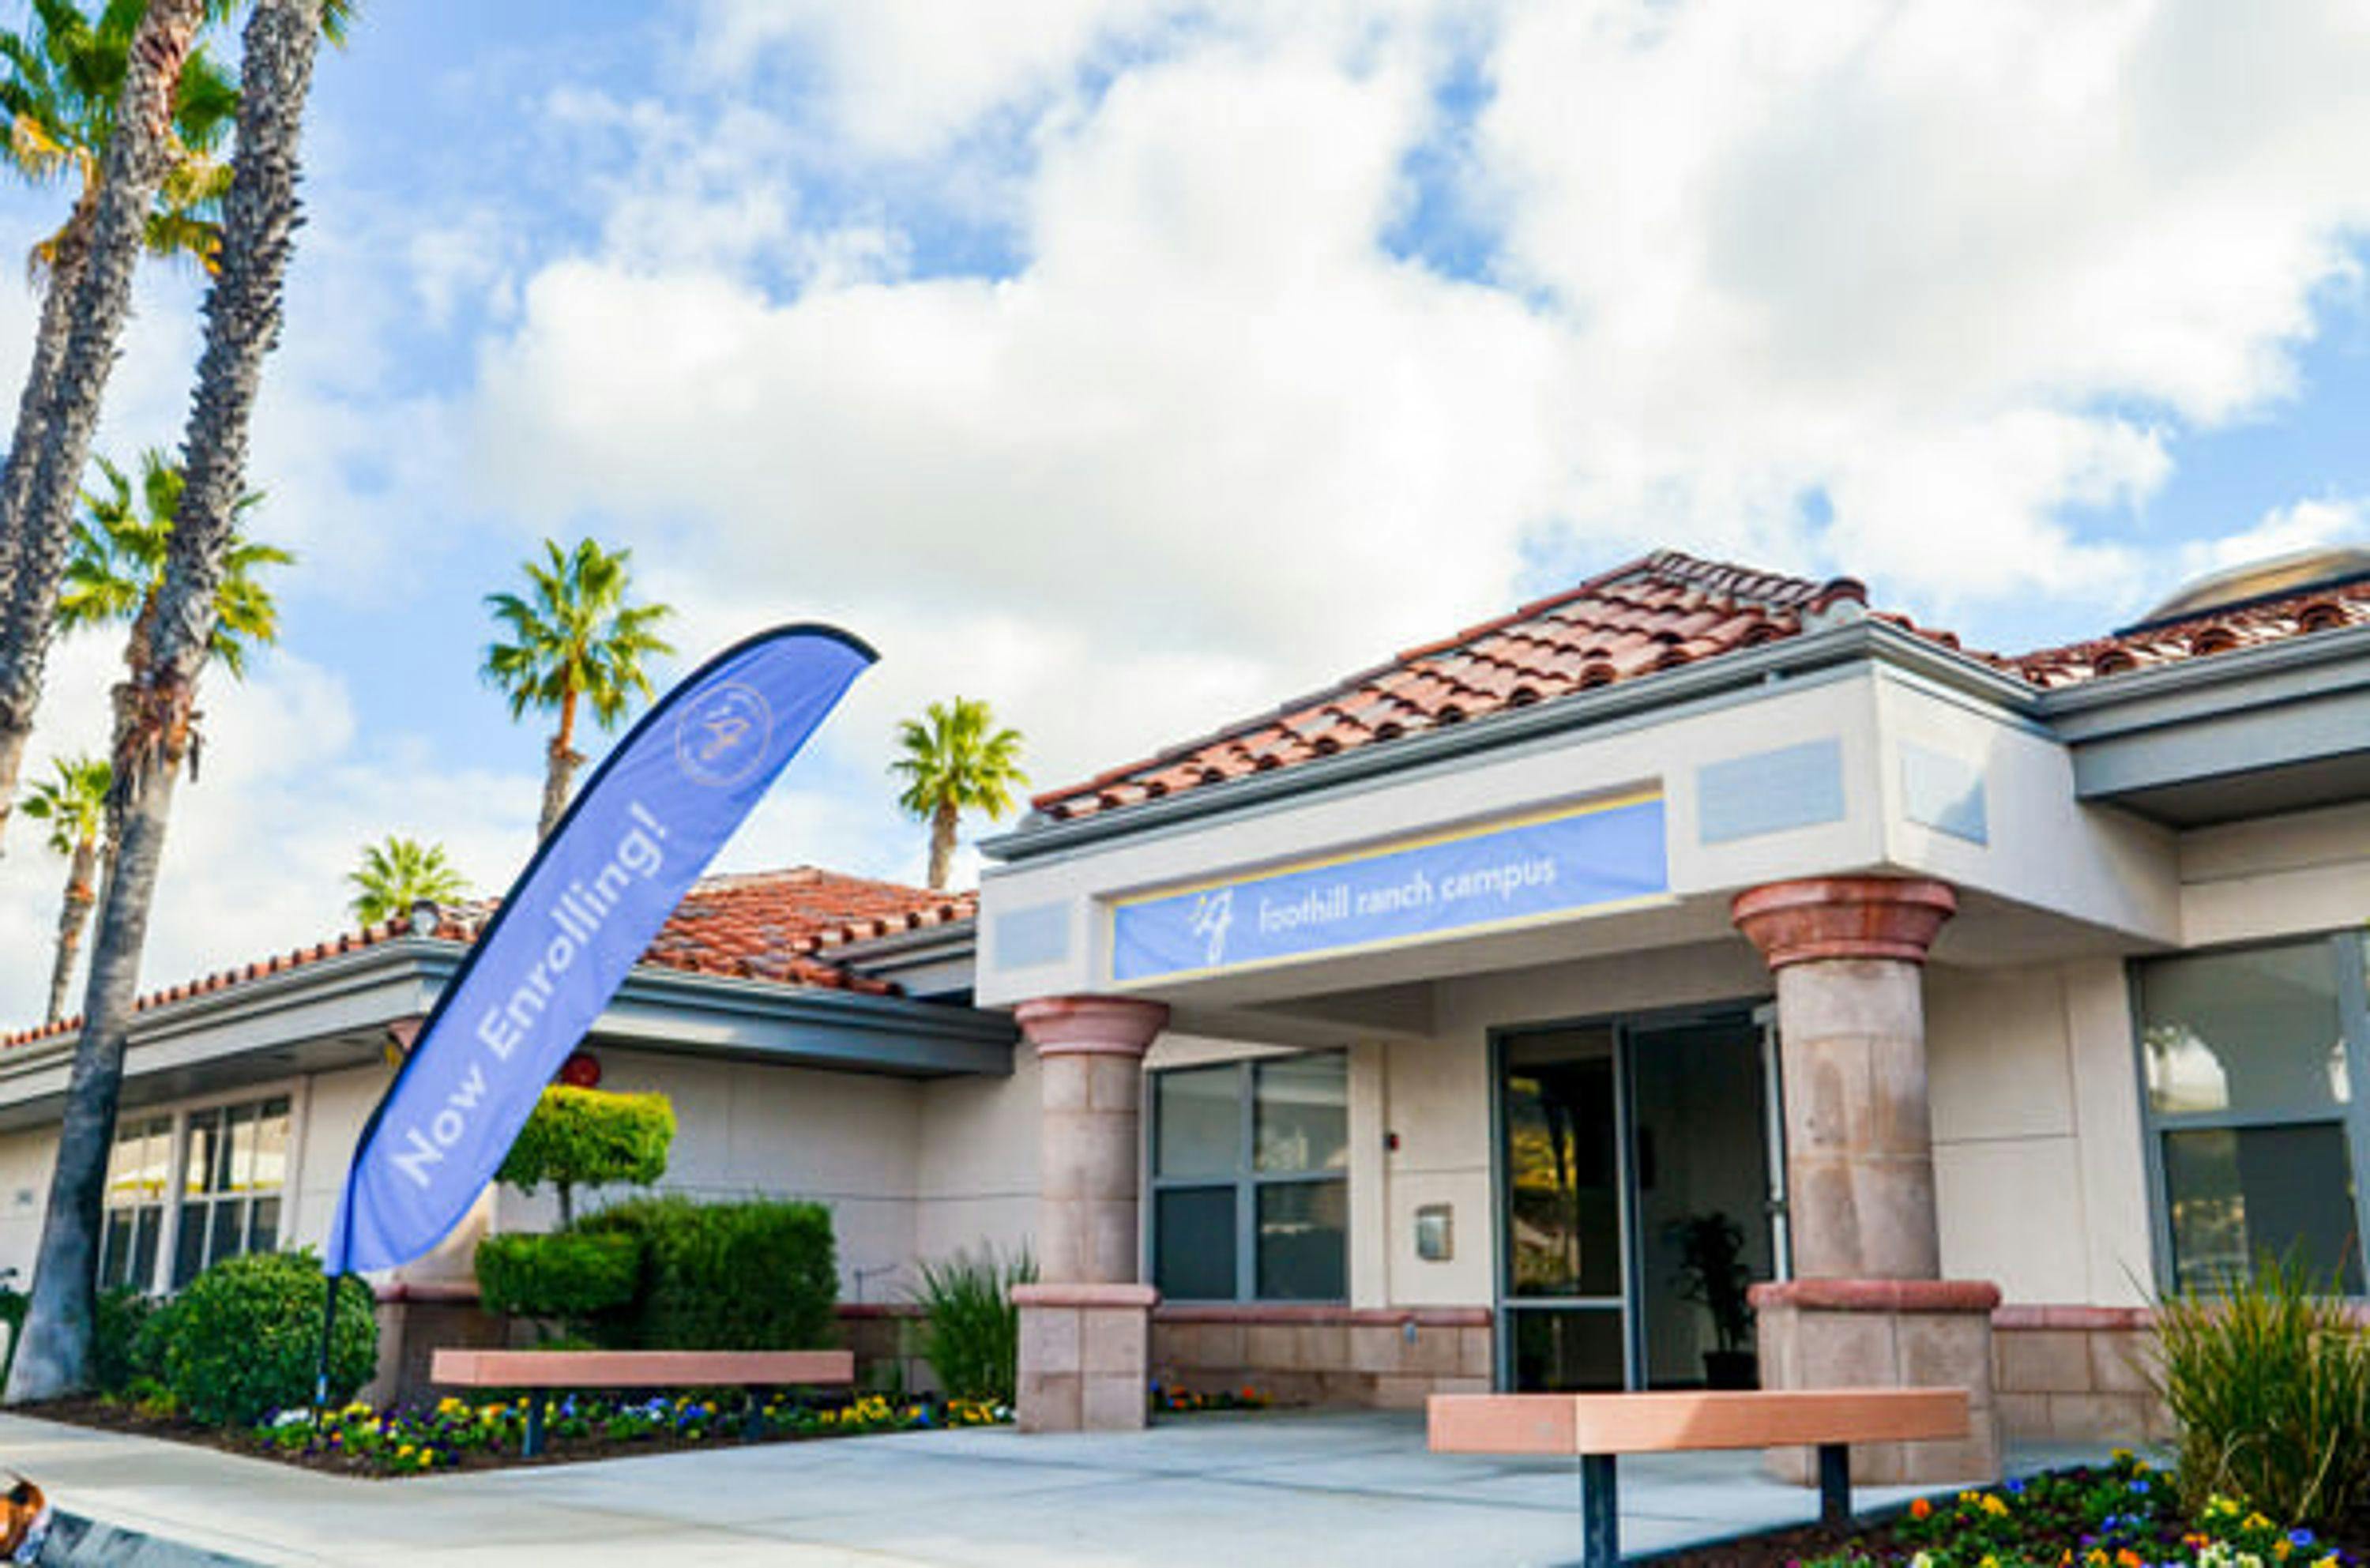 View of Guidepost Montessori at Foothill Ranch entrance way with sitting benches on either side, colorful flower gardens, palm trees towering in the background and a feather "Now Enrolling" Banner.